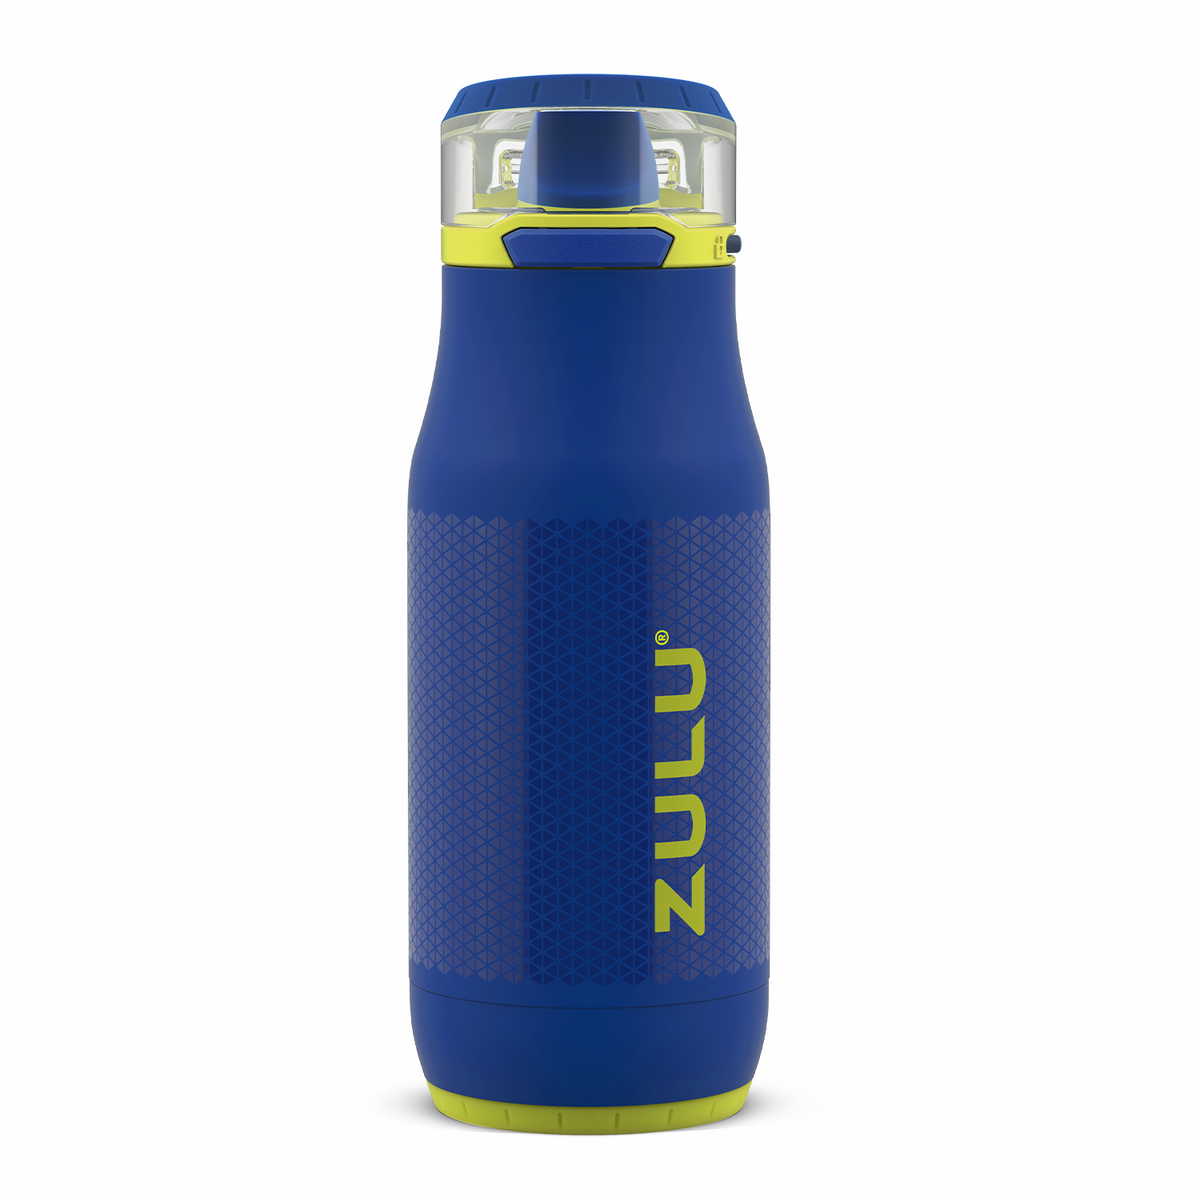 Chase 14oz Stainless Steel Kids Water Bottle with Straw – Zulu Athletic